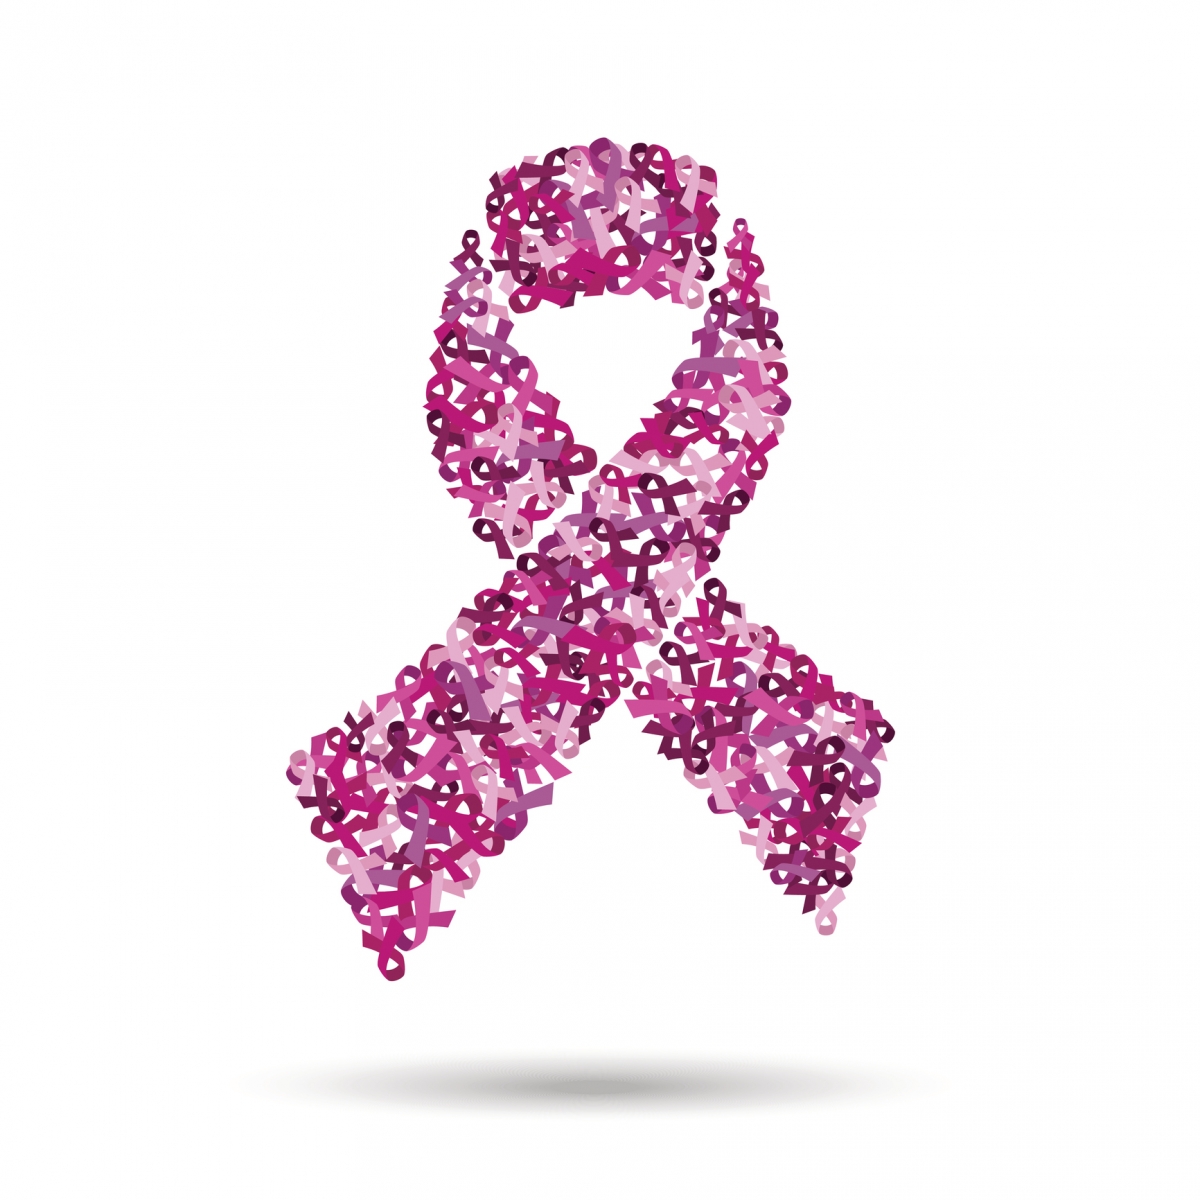 How Can You Show Support For 'Breast Cancer Awareness Month’ This October?